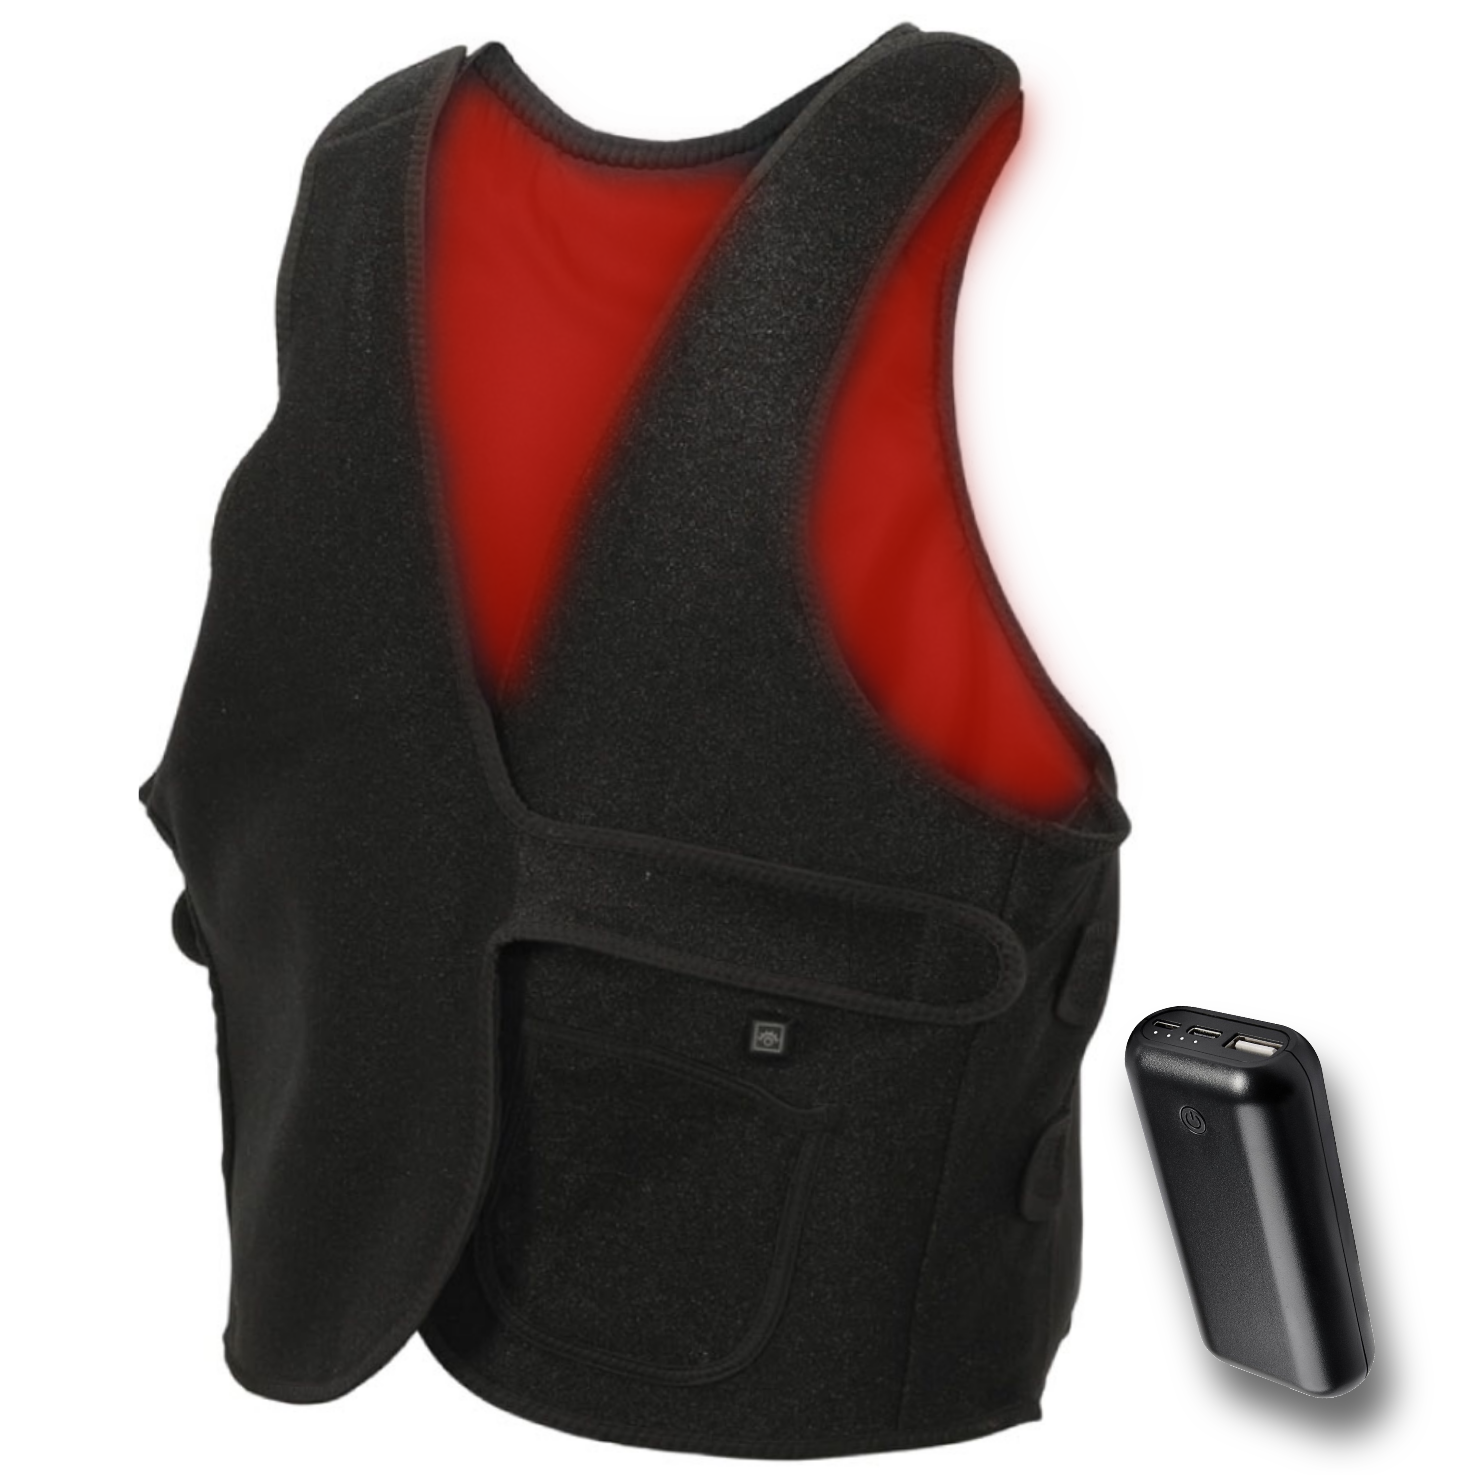 Rechargeable electric heated vest battery included